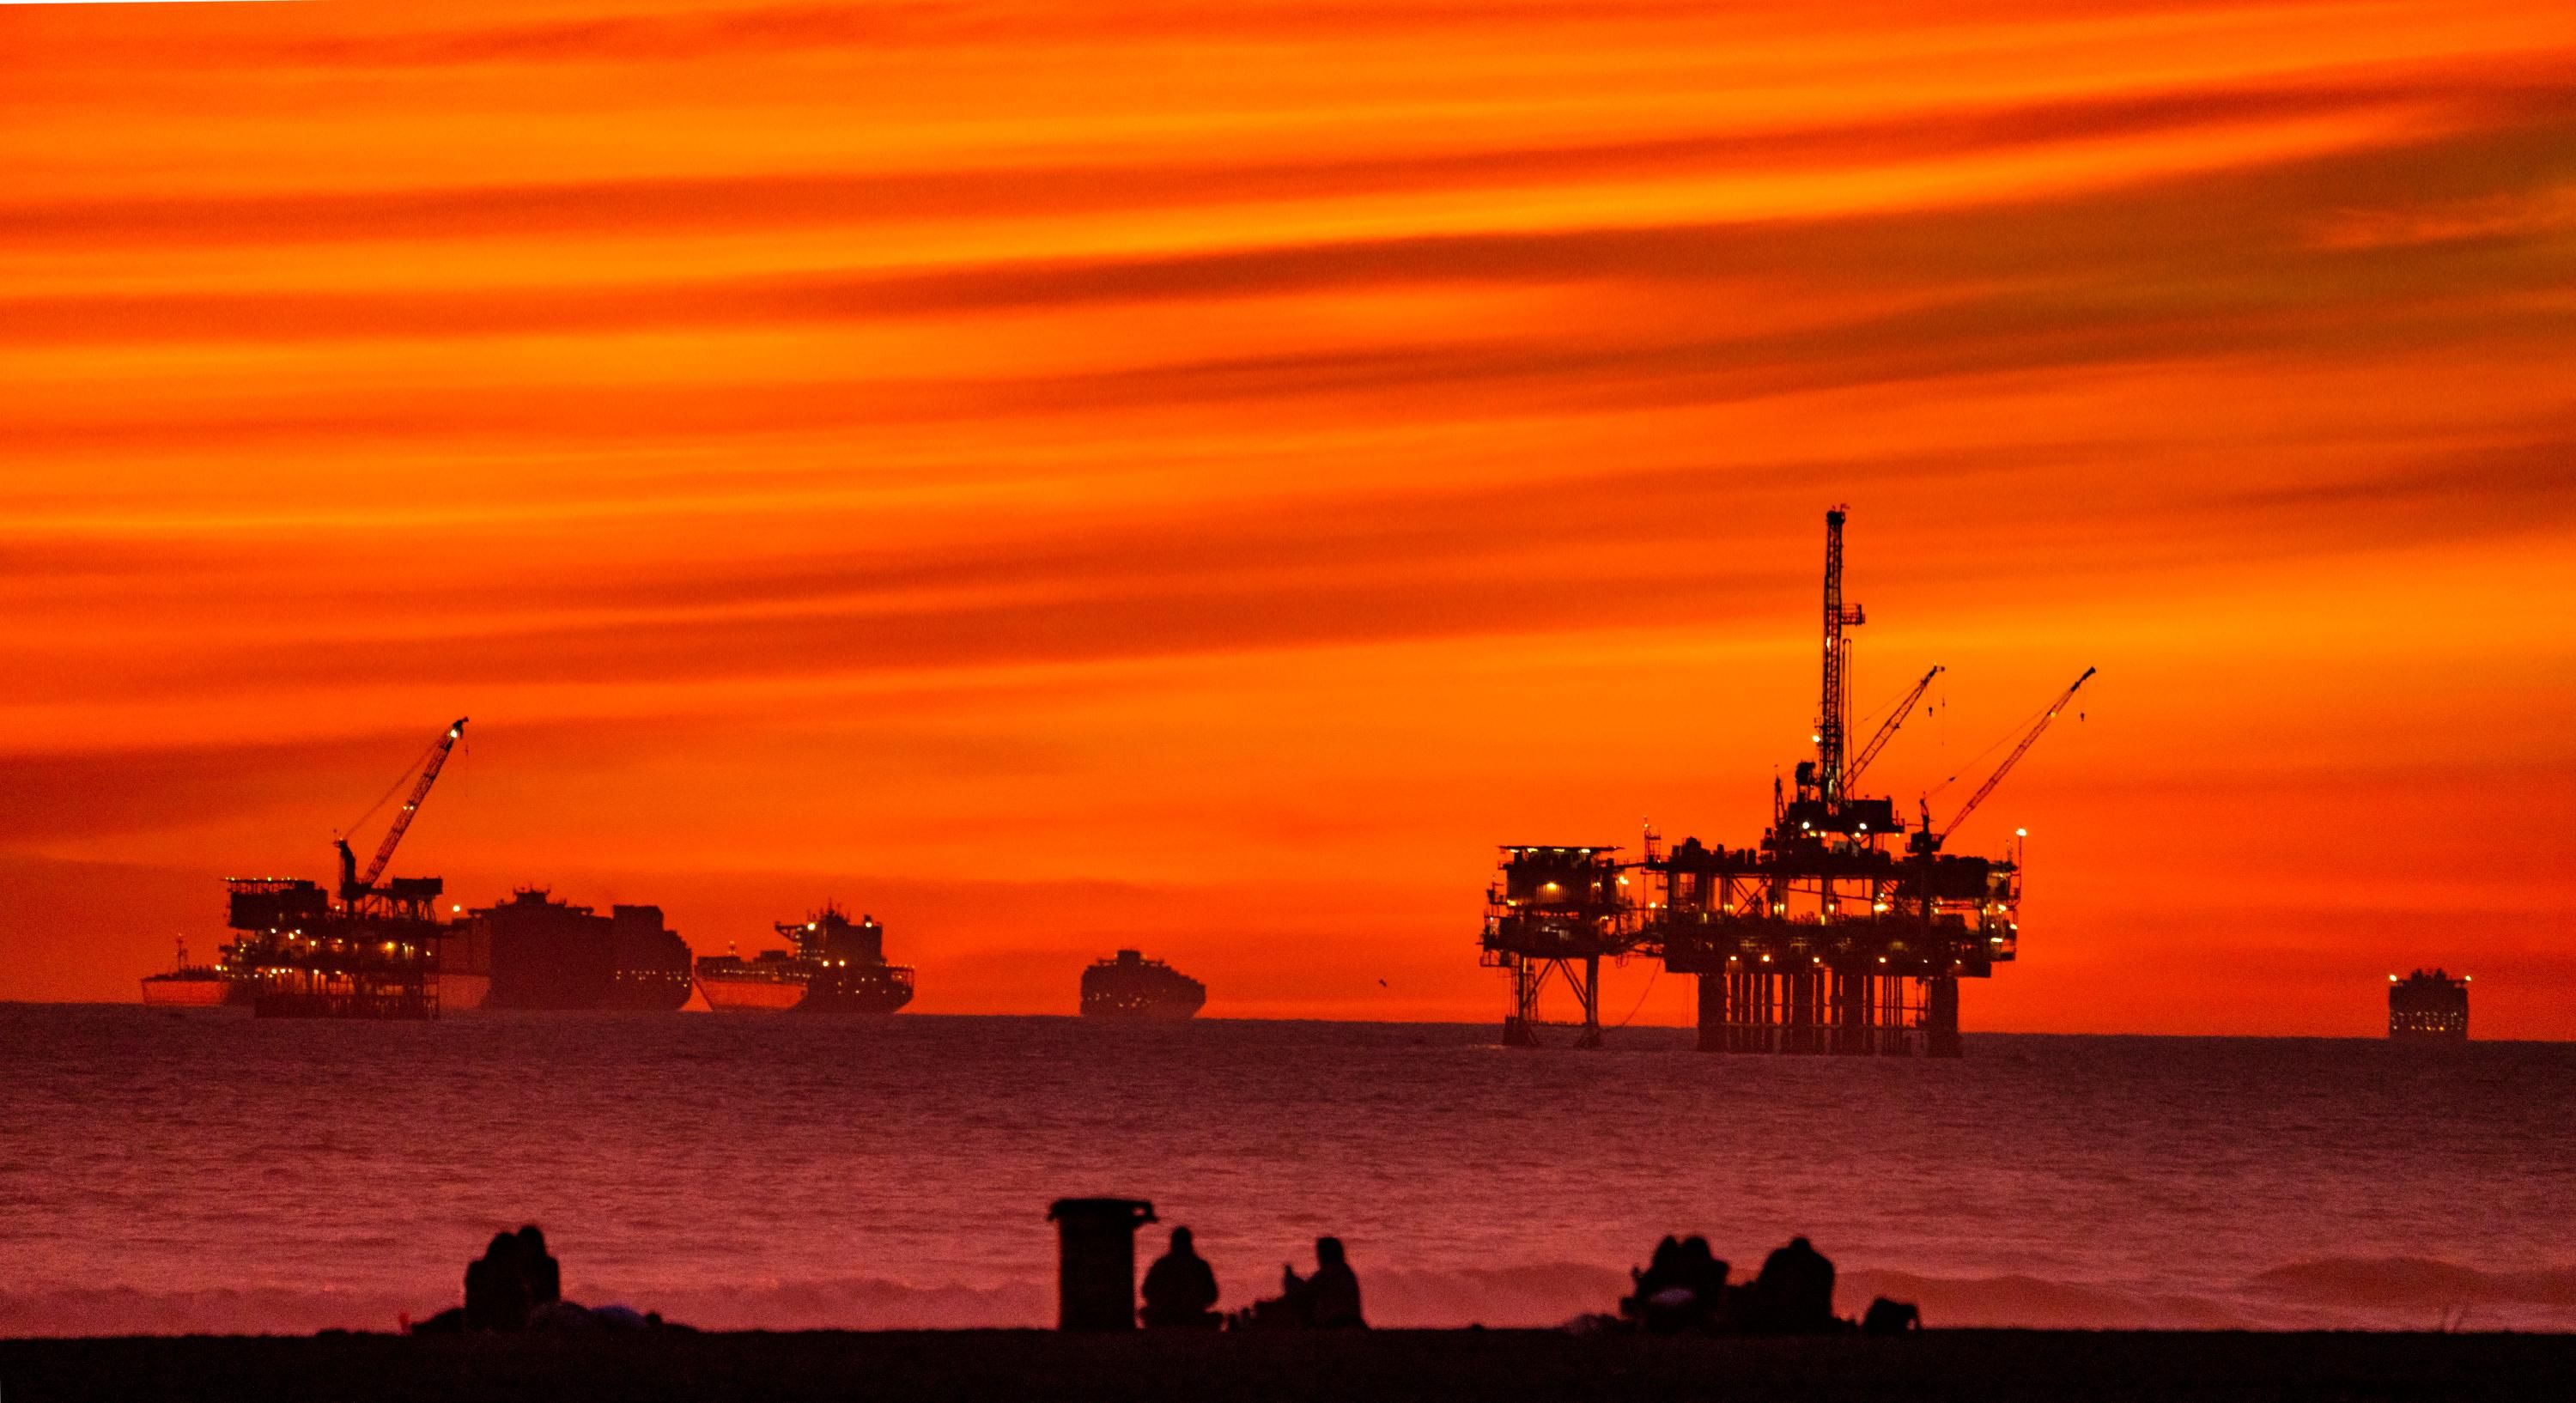 The sun sets over container ships and oil platforms off the coast of Huntington Beach, California on January 12, 2021. (Photo: Leonard Ortiz/MediaNews Group/Orange County Register via Getty Images)